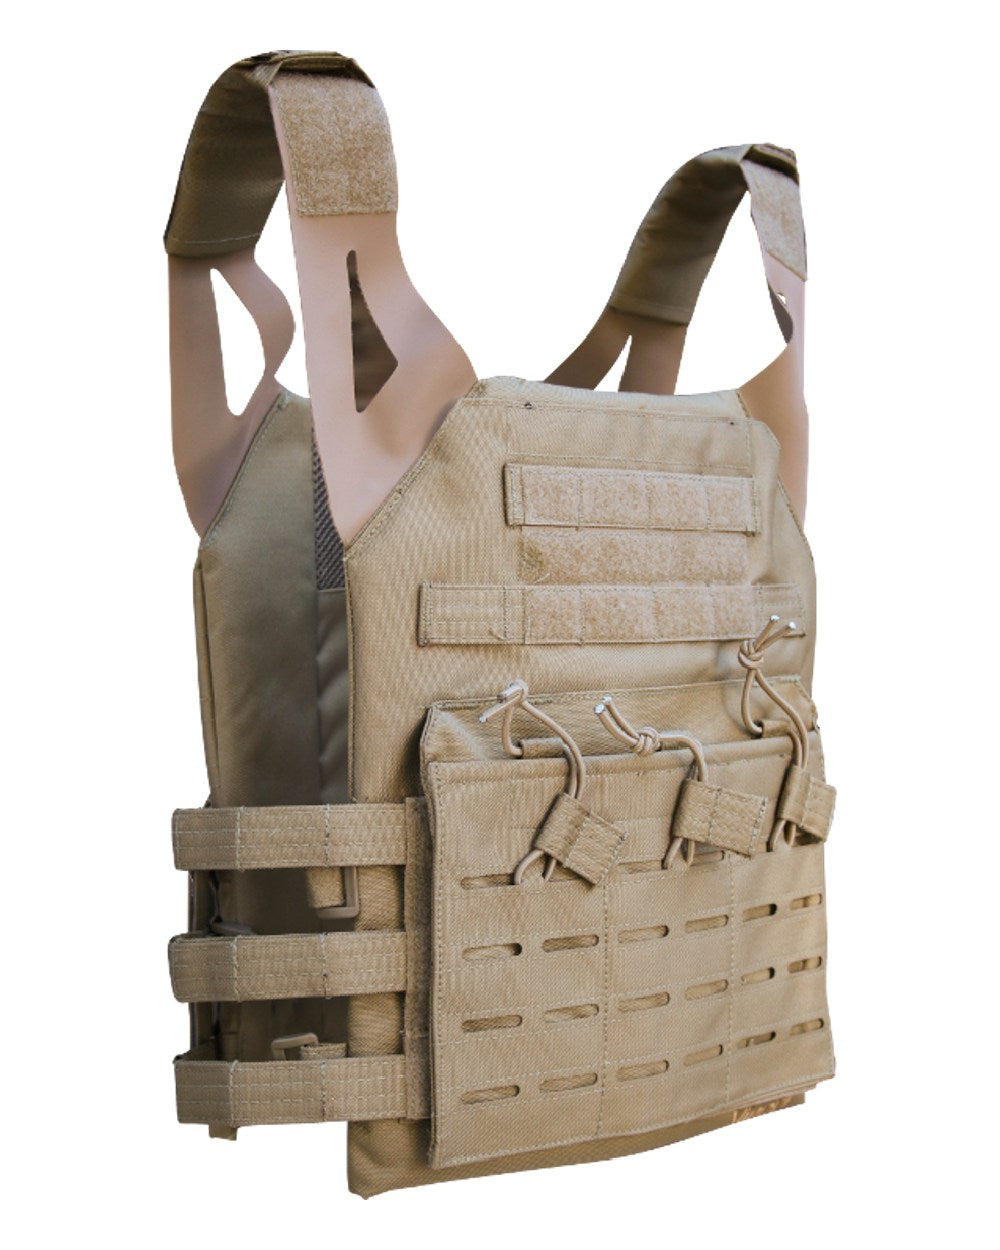 Viper Special Ops Plate Carrier in Coyote 